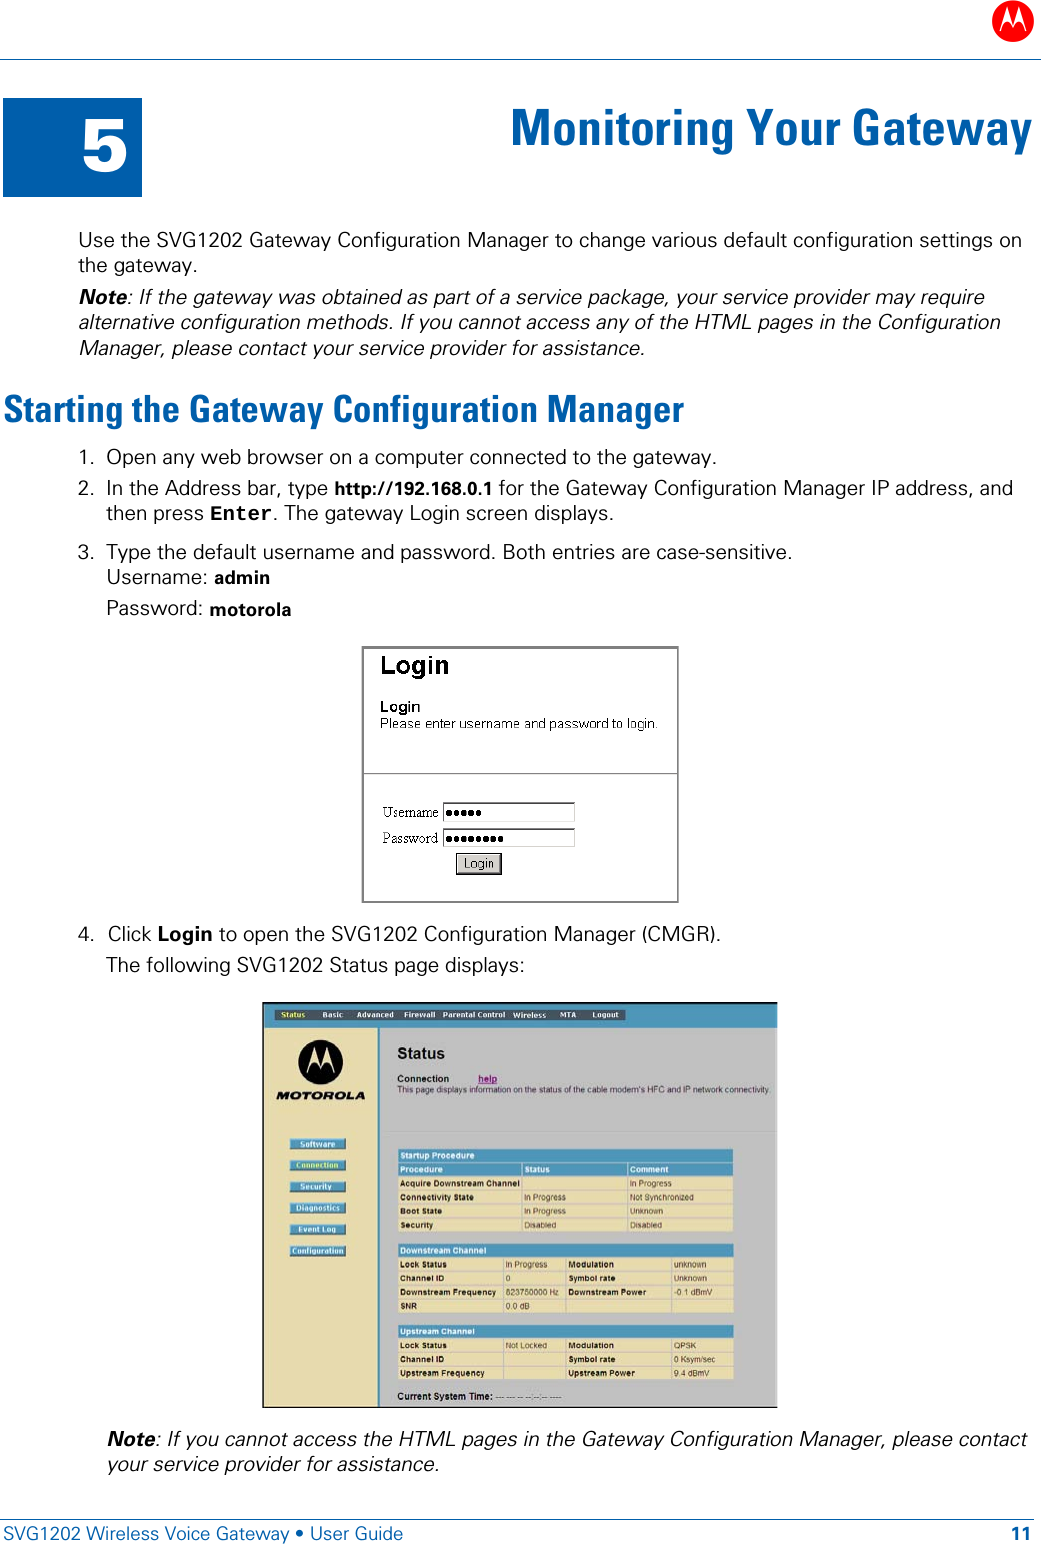 B   SVG1202 Wireless Voice Gateway • User Guide 11  5 Monitoring Your Gateway  Use the SVG1202 Gateway Configuration Manager to change various default configuration settings on the gateway. Note: If the gateway was obtained as part of a service package, your service provider may require alternative configuration methods. If you cannot access any of the HTML pages in the Configuration Manager, please contact your service provider for assistance. Starting the Gateway Configuration Manager 1. Open any web browser on a computer connected to the gateway. 2. In the Address bar, type http://192.168.0.1 for the Gateway Configuration Manager IP address, and then press Enter. The gateway Login screen displays. 3. Type the default username and password. Both entries are case-sensitive. Username: admin Password: motorola   4. Click Login to open the SVG1202 Configuration Manager (CMGR). The following SVG1202 Status page displays:  Note: If you cannot access the HTML pages in the Gateway Configuration Manager, please contact your service provider for assistance. 